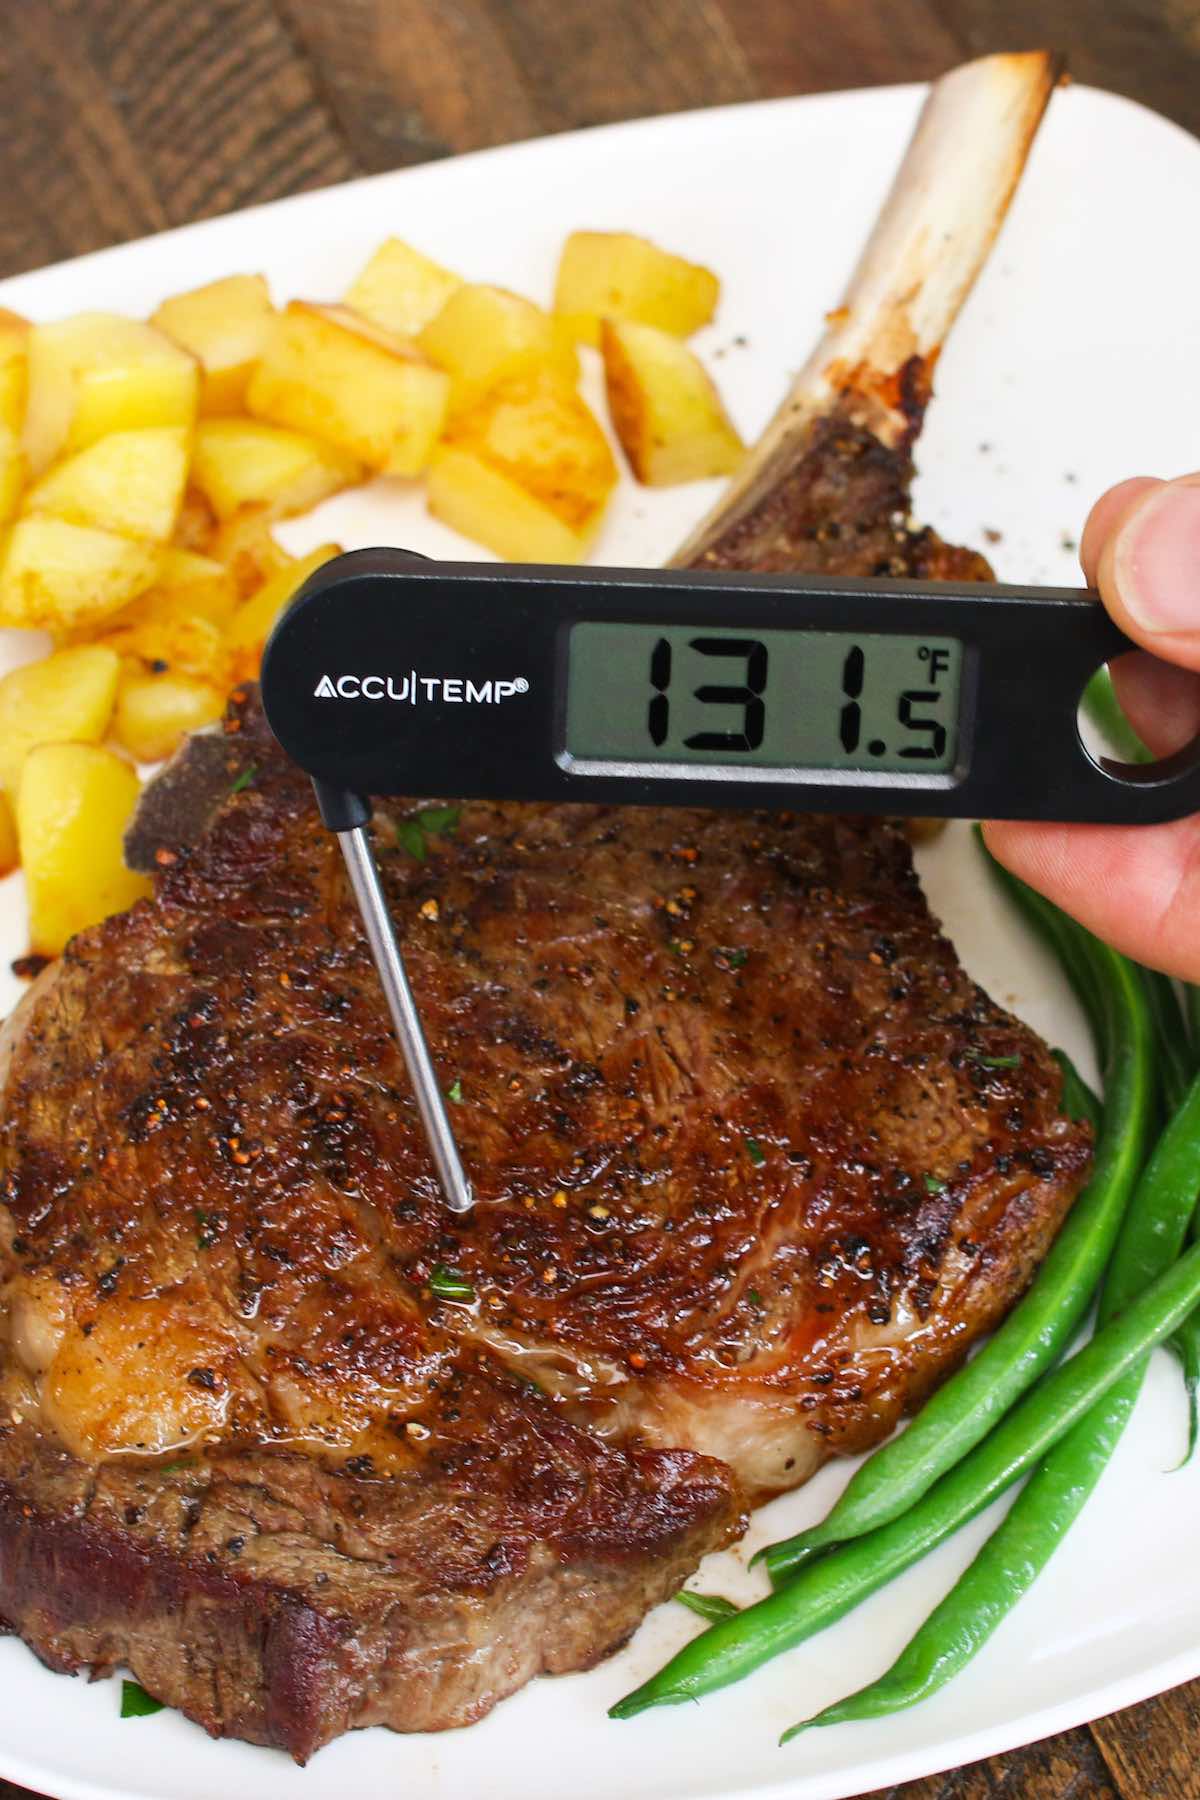 Checking doneness of a cowboy cut using an instant-read thermometer inserted into the middle of the steak. The reading is 131°F indicating medium doneness